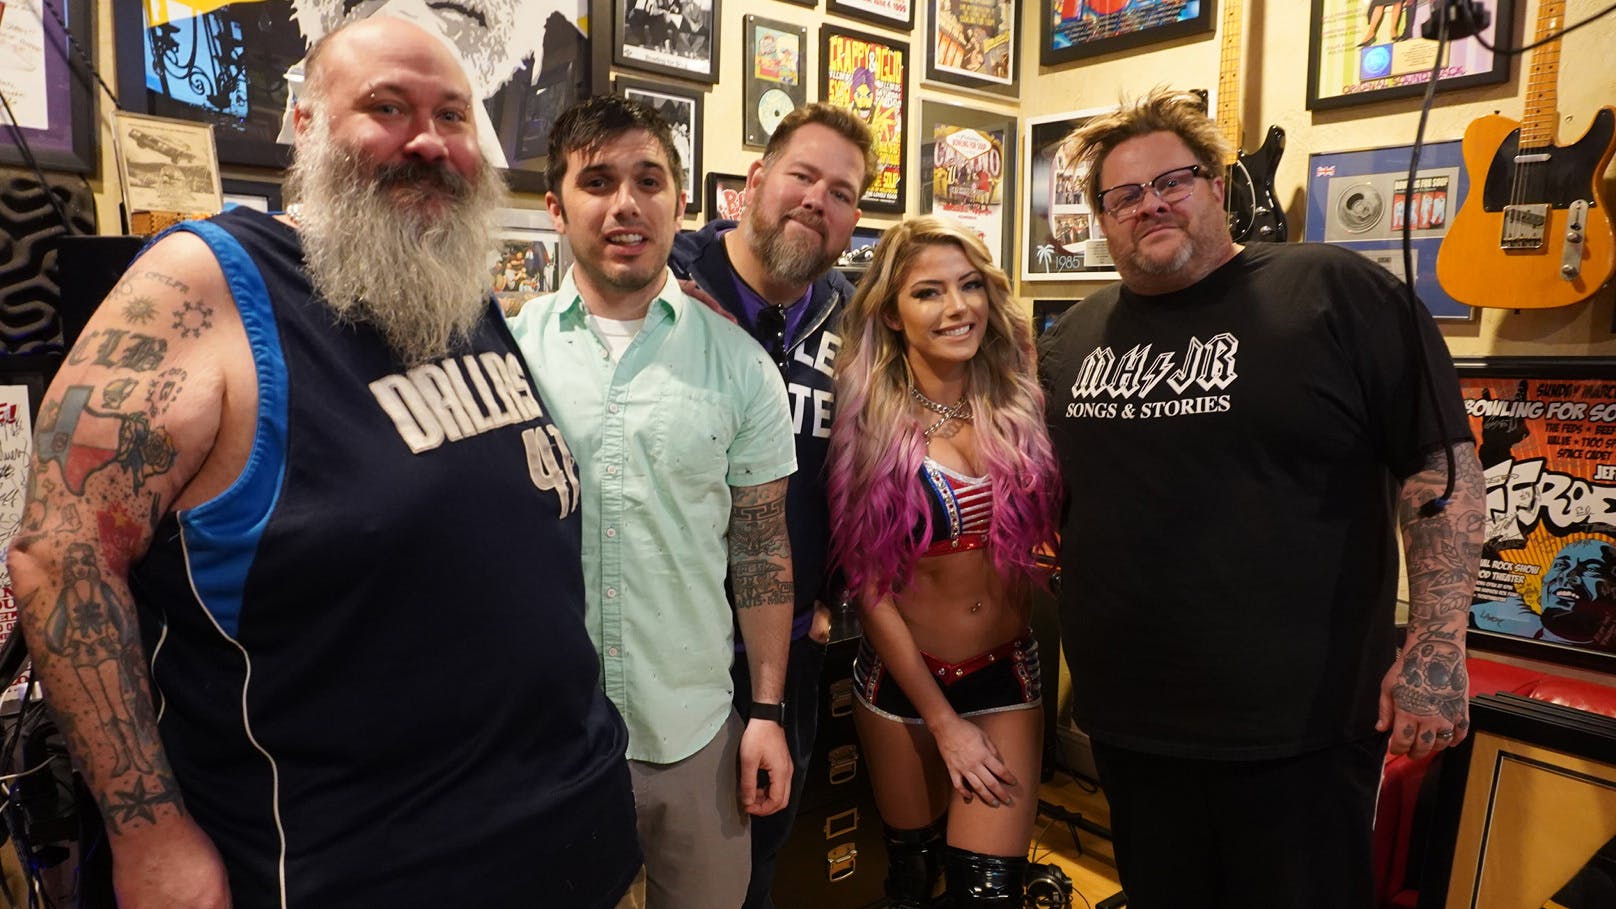 "My Childhood Dream Came True": WWE's Alexa Bliss On Her Collab With Bowling For Soup